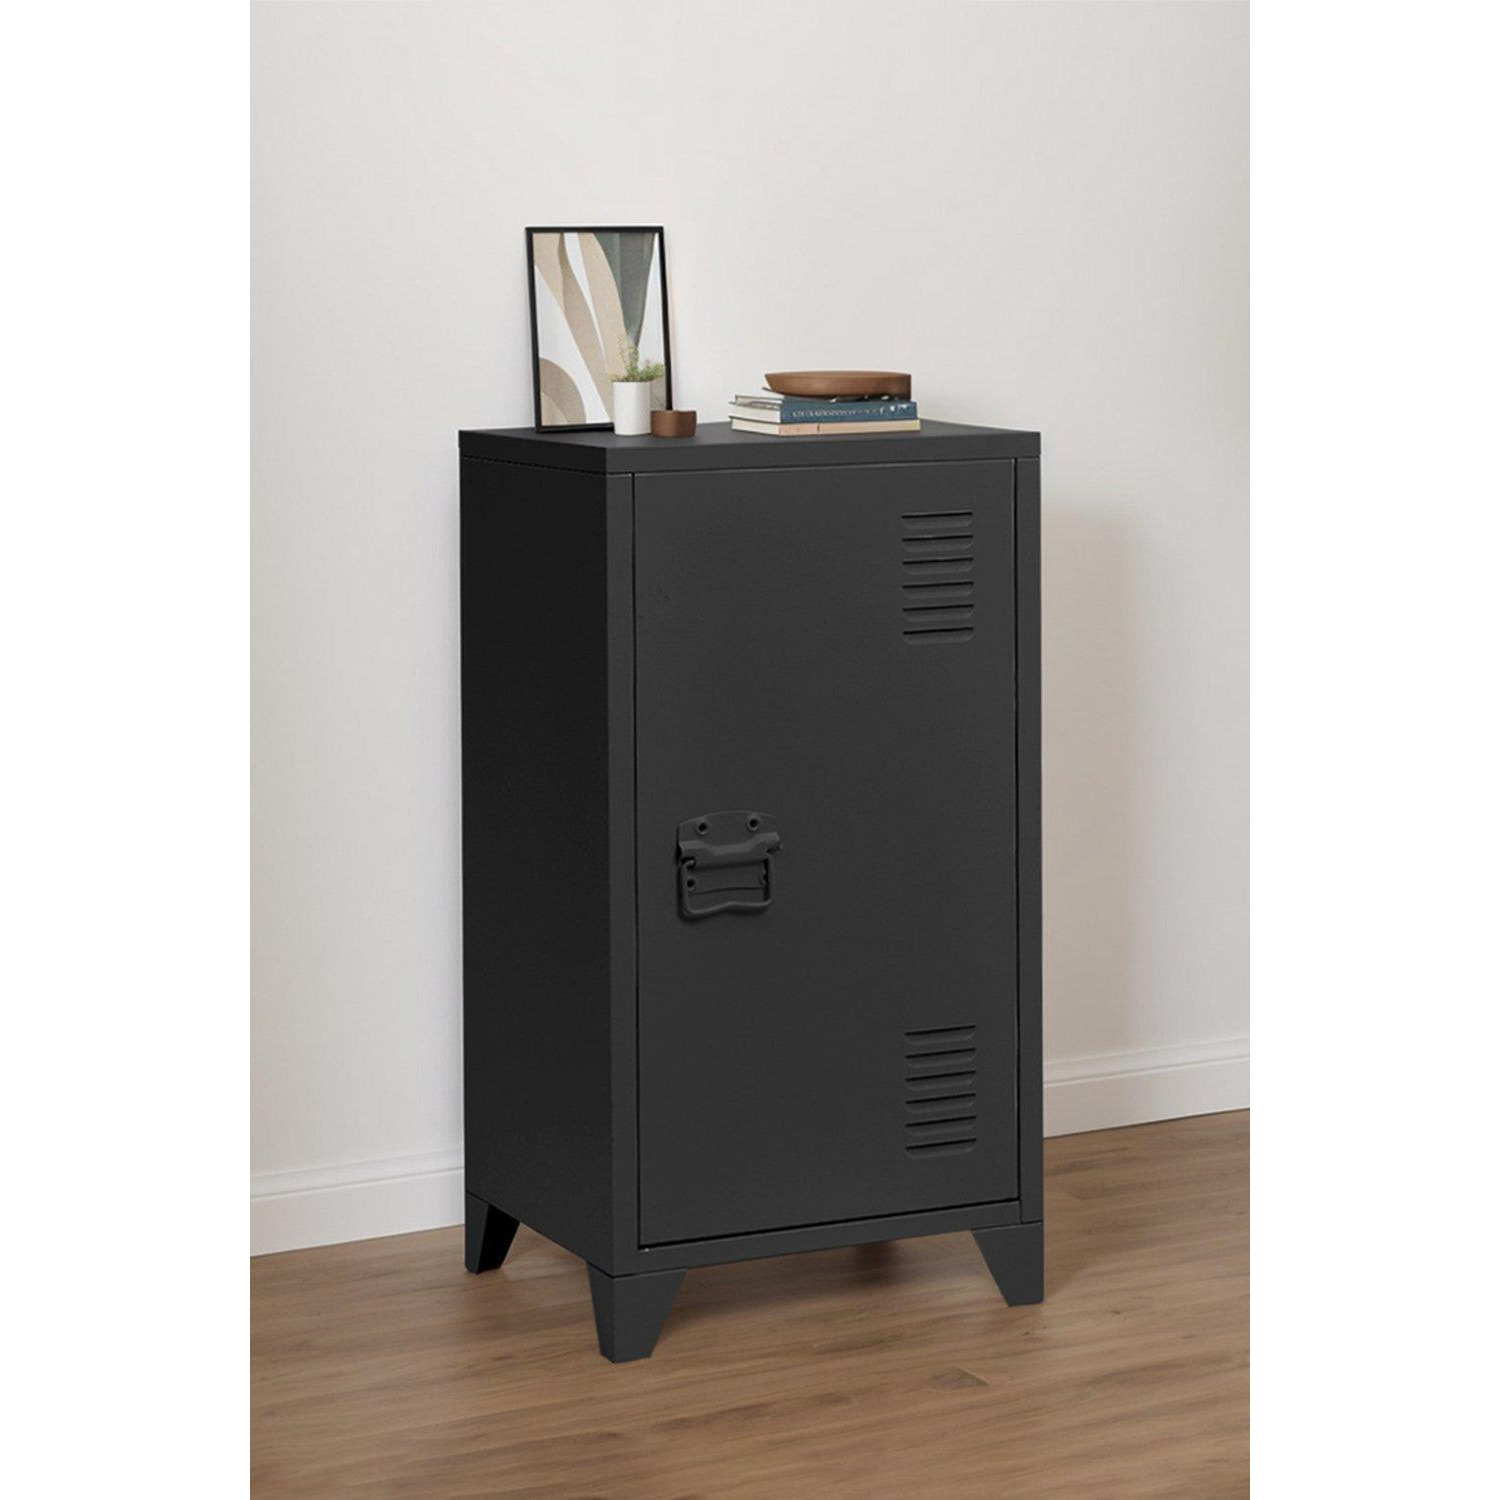 1 Door Tall Storage Filing Cabinet for Office - image 1